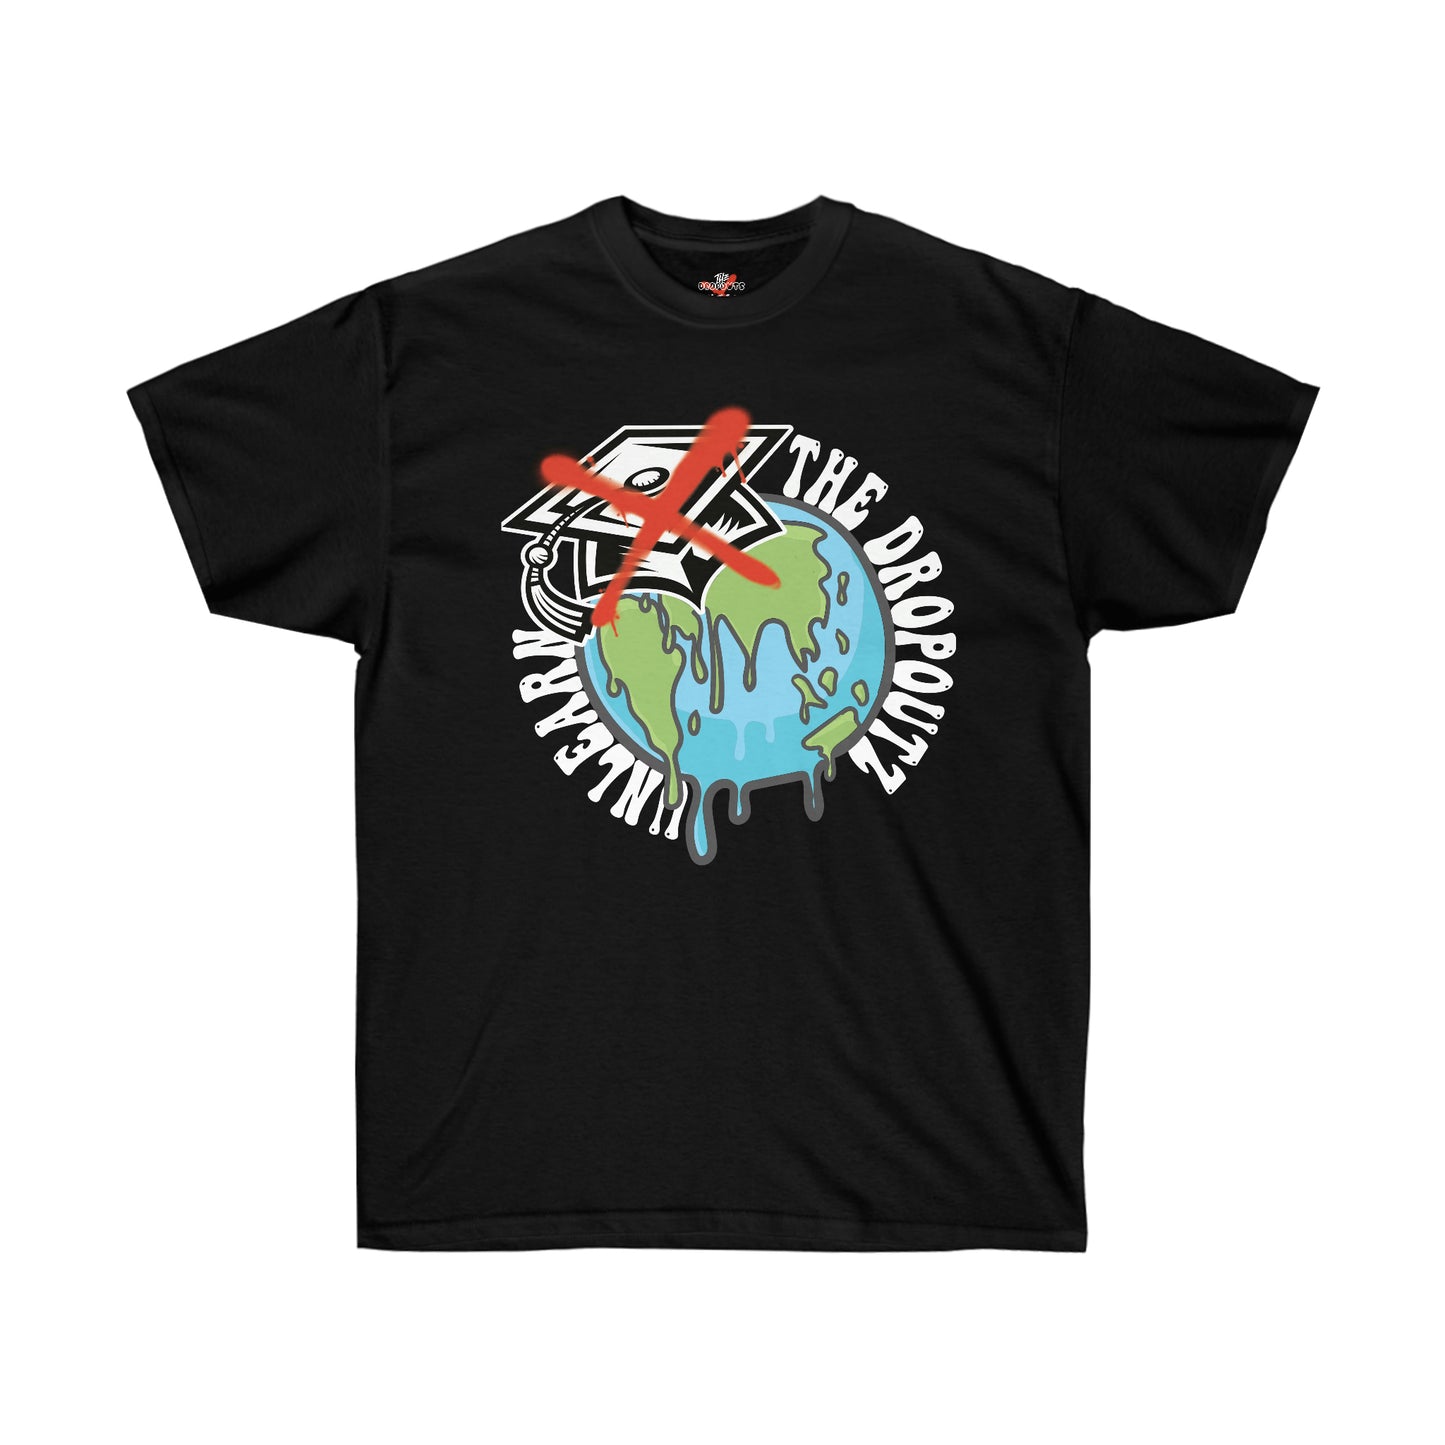 Unlearn X The Dropoutz - Limited Tee